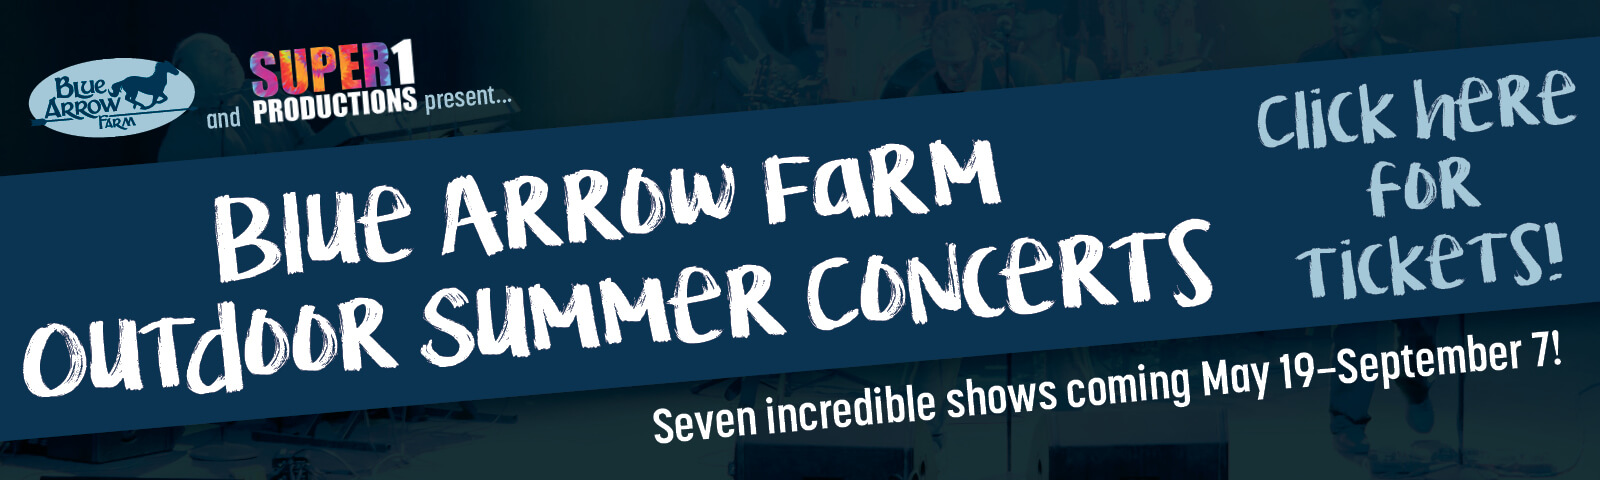 Blue Arrow Farm Outdoor Summer Concerts: Seven incredible shows coming May 19–September 7! Click here for tickets!